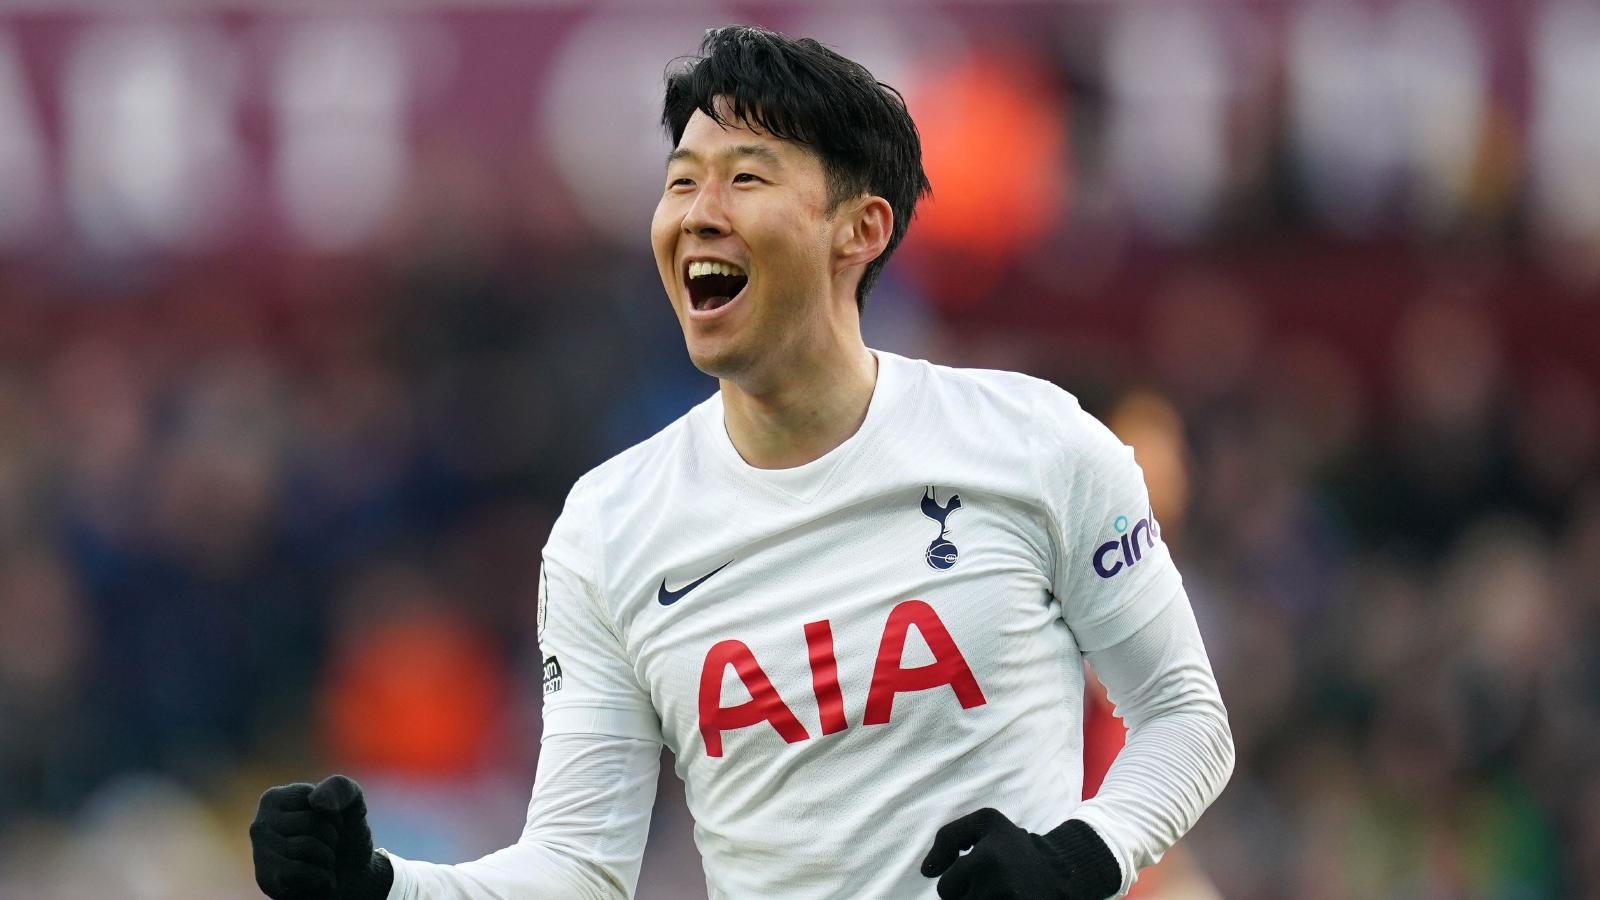 Tottenham Hotspur's Son Heung-min celebrates scoring their side's fourth goal of the game, completing a hat-trick during the Premier League match at Villa Park, Birmingham. Picture date: Saturday April 9, 2022.